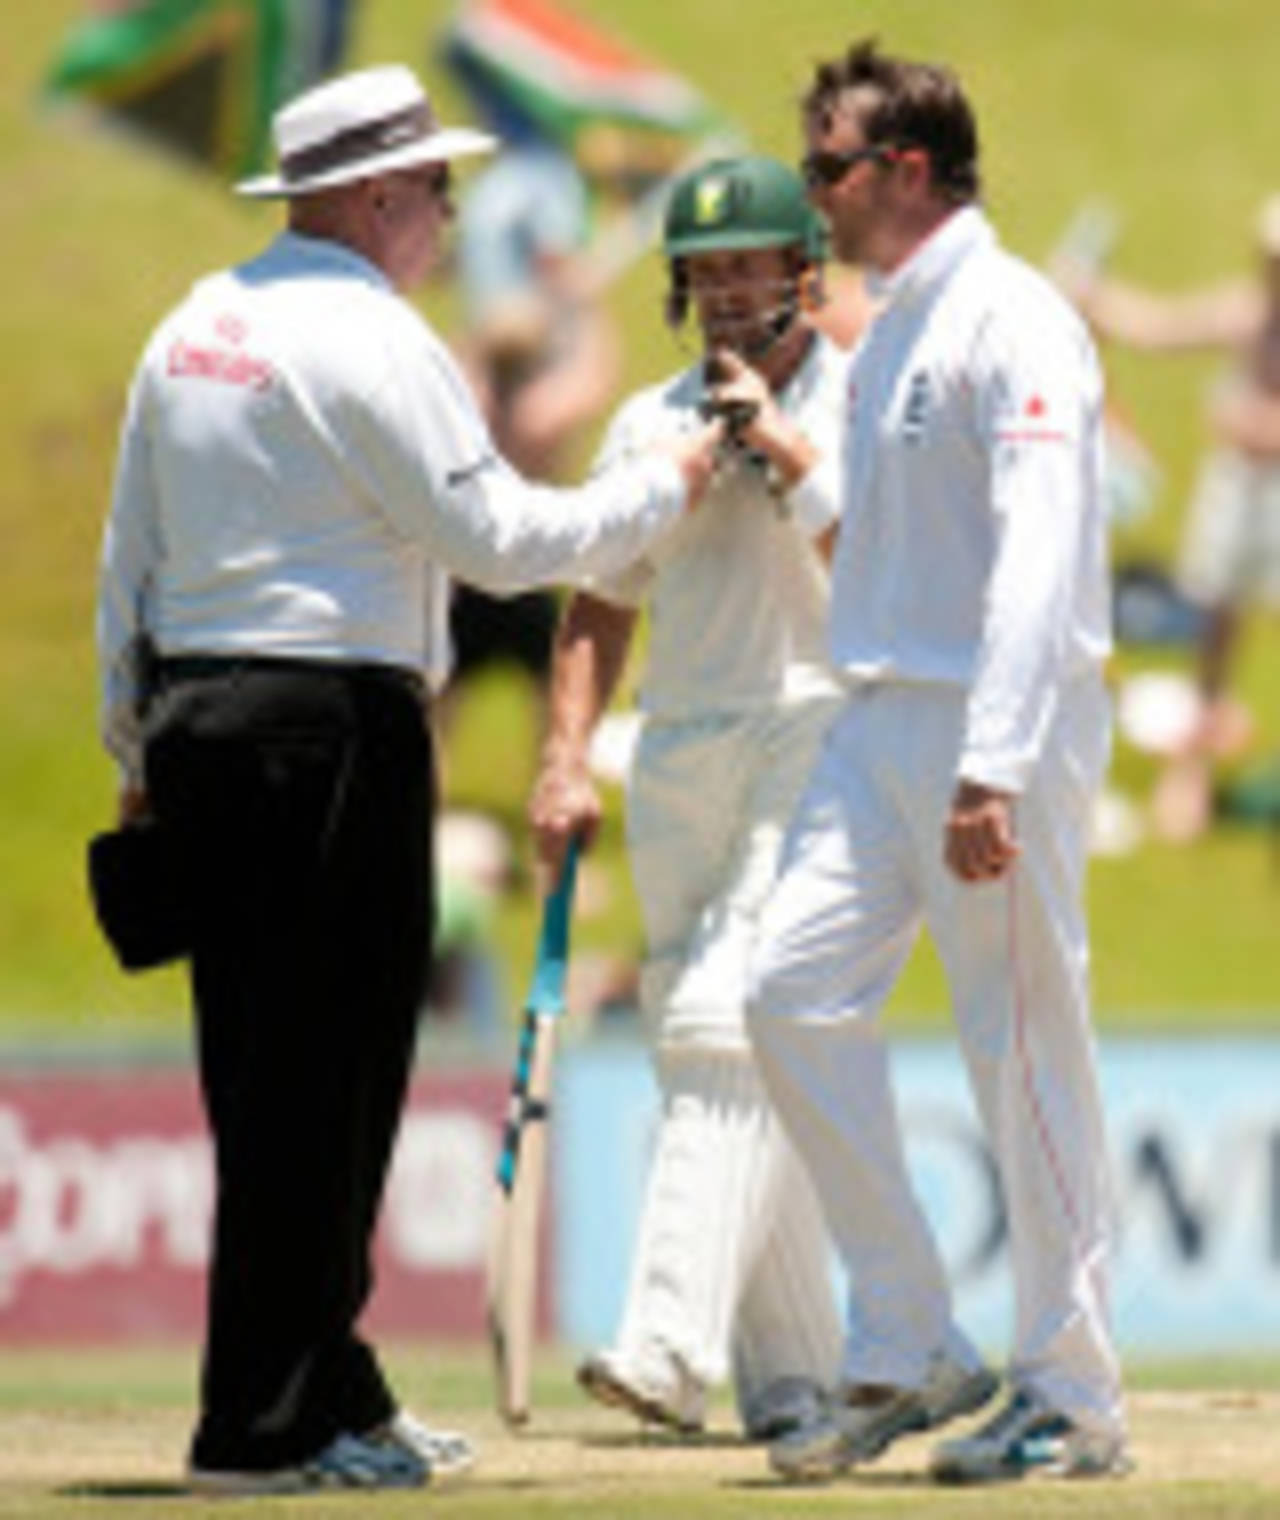 Graeme Swann was frustrated to be thwarted by the UDRS when Morkel was given not out on review, South Africa v England, 1st Test, Centurion, December 17, 2009